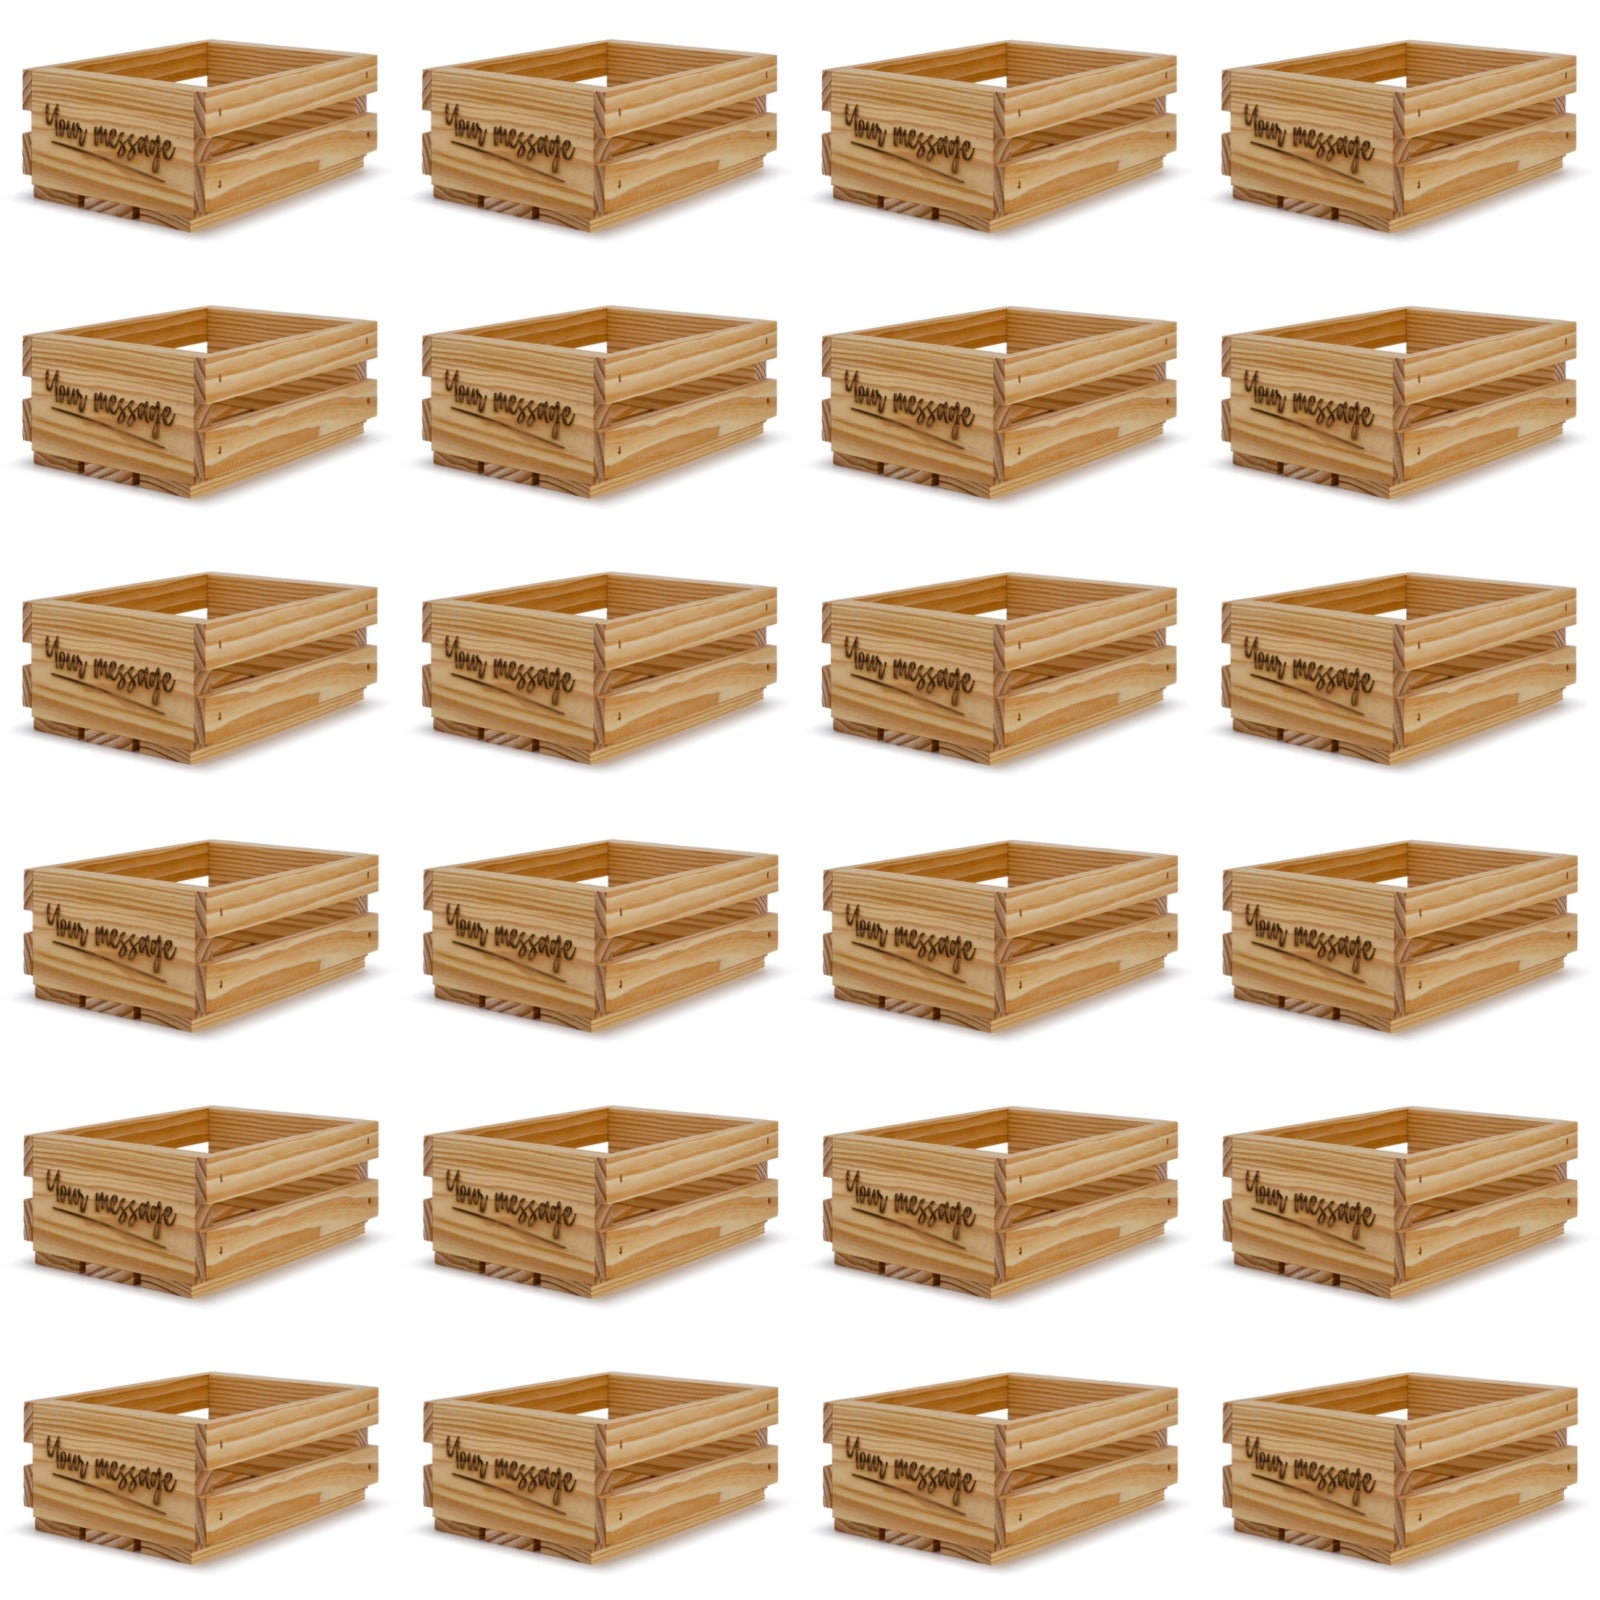 24 Small wooden crates with your message 8x6x3.5